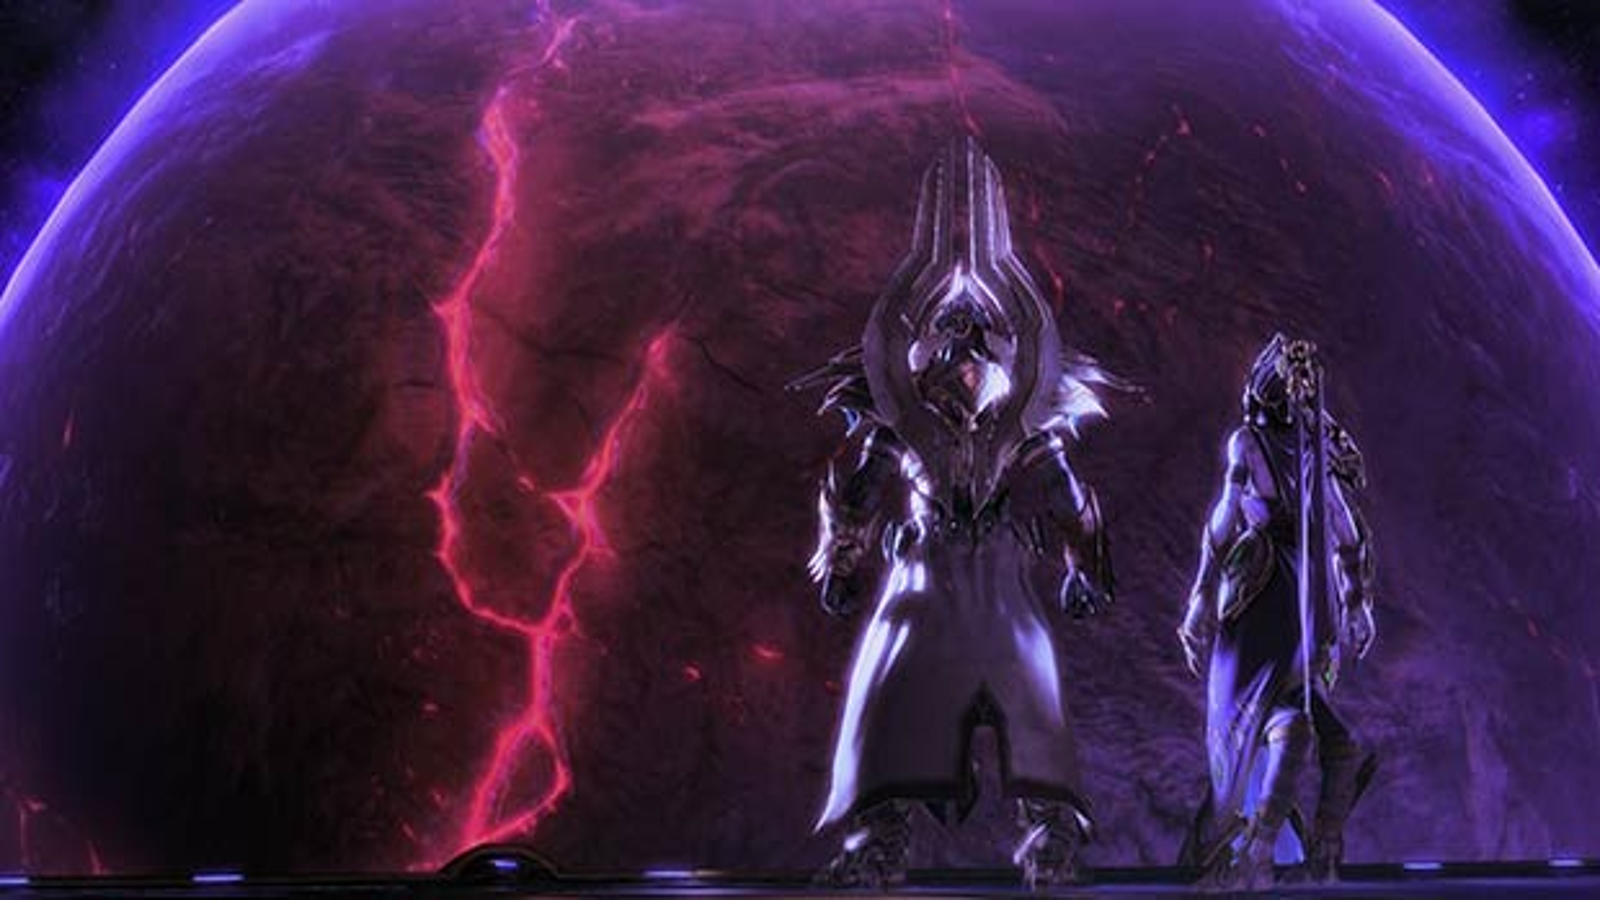 Reaper (Legacy of the Void) - Liquipedia - The StarCraft II